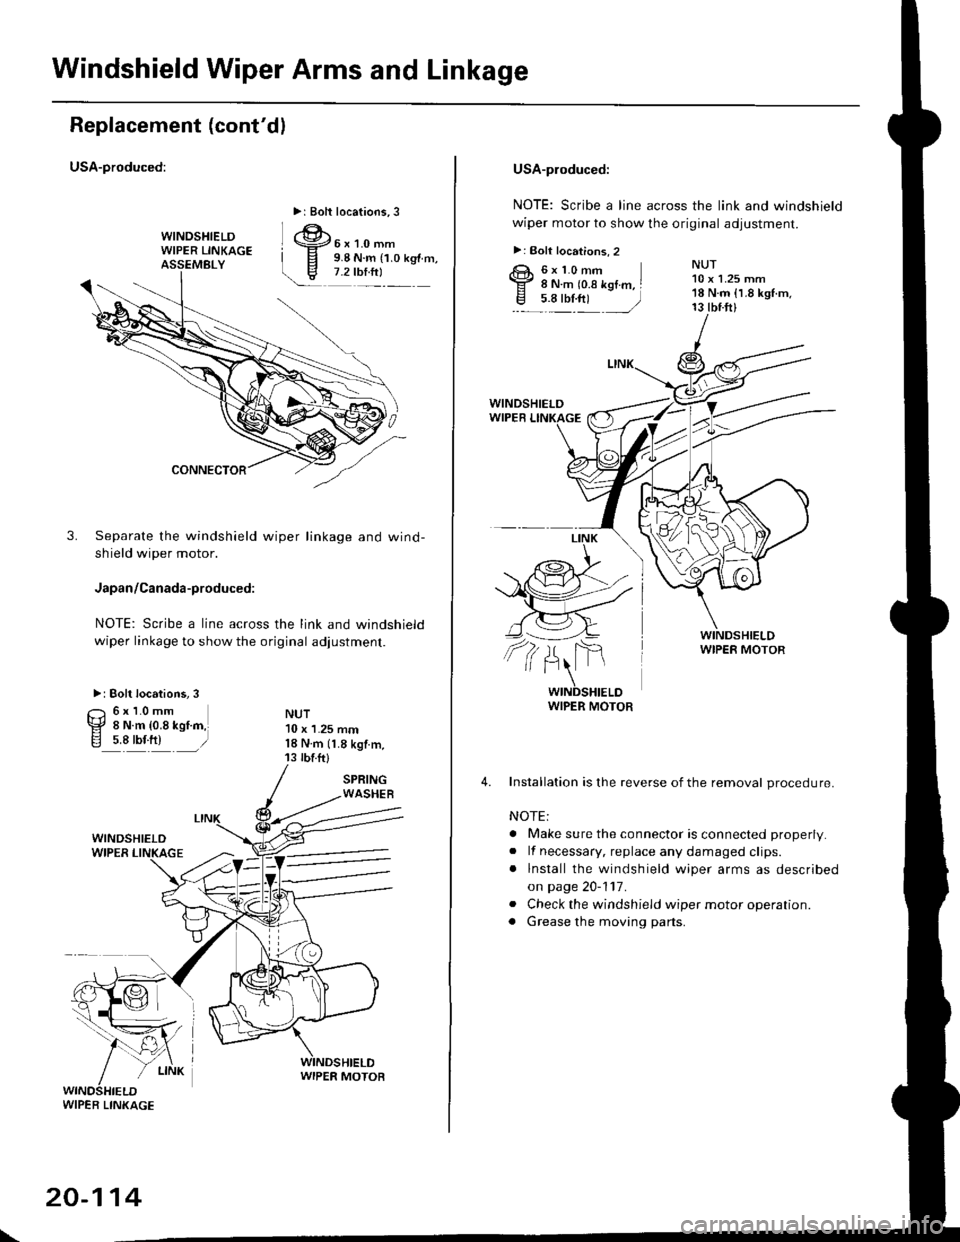 HONDA CIVIC 1998 6.G Workshop Manual Windshield Wiper Arms and Linkage
Replacement (contdl
USA-produced:
3. Separate the windshield wiper linkage and wind-
shield wiper motor.
Japan/Canada-produced:
NOTE: Scribe a line across the link a